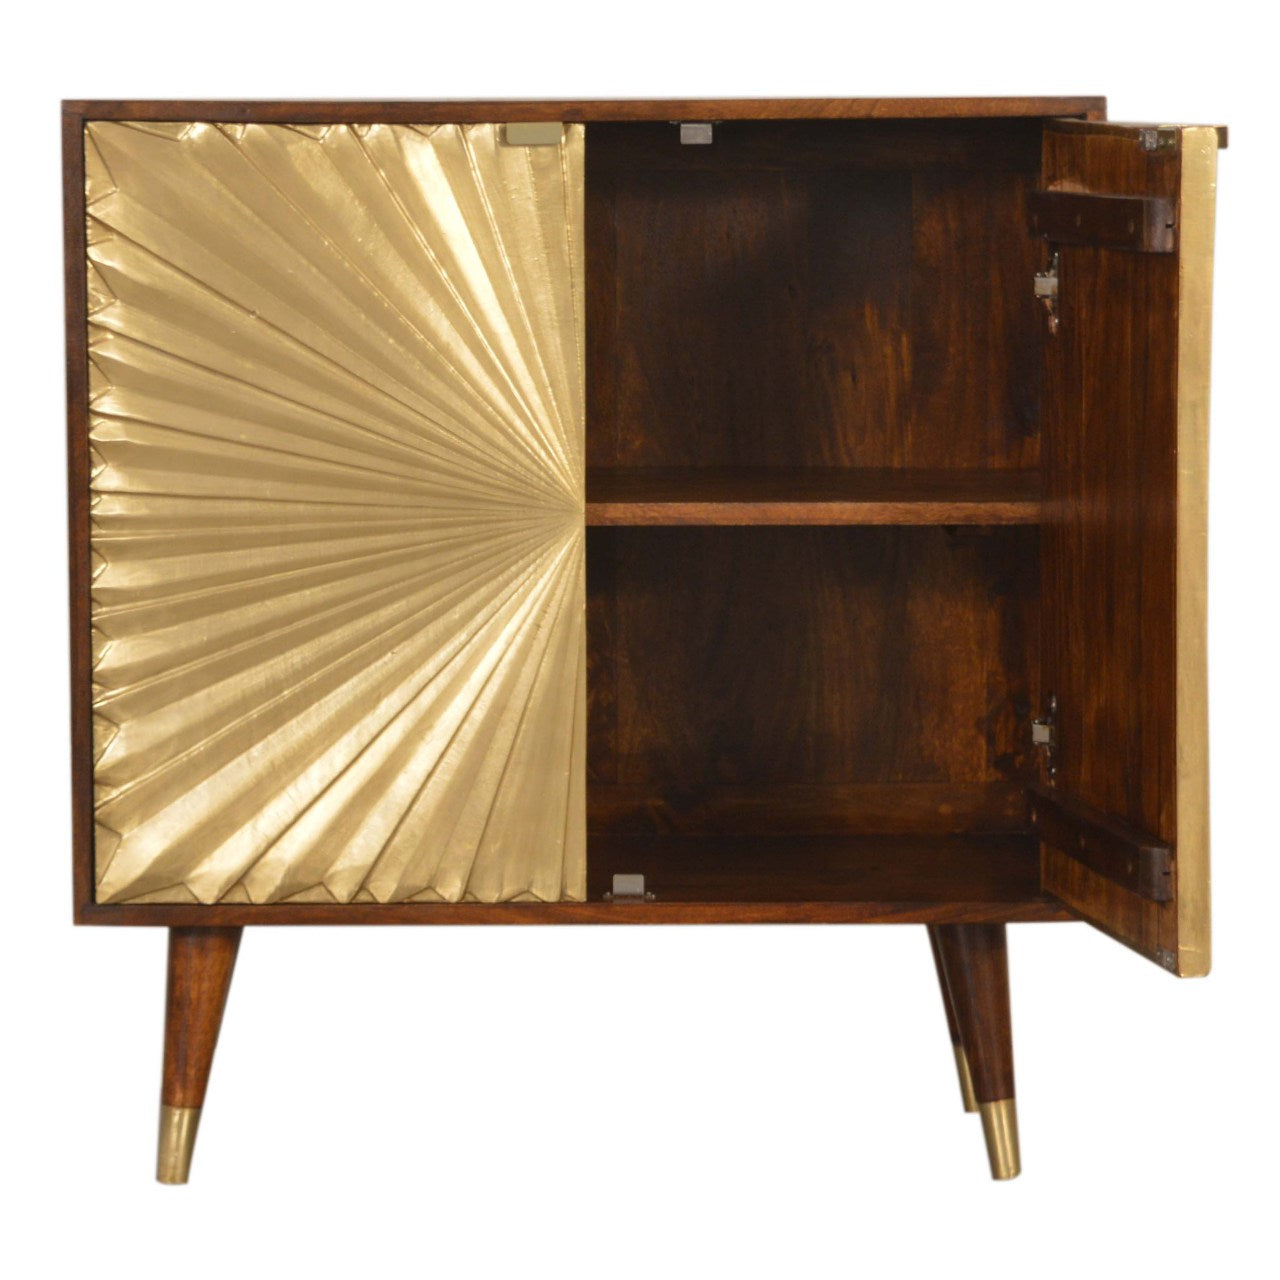 Manila Gold Solid Wood Cabinet